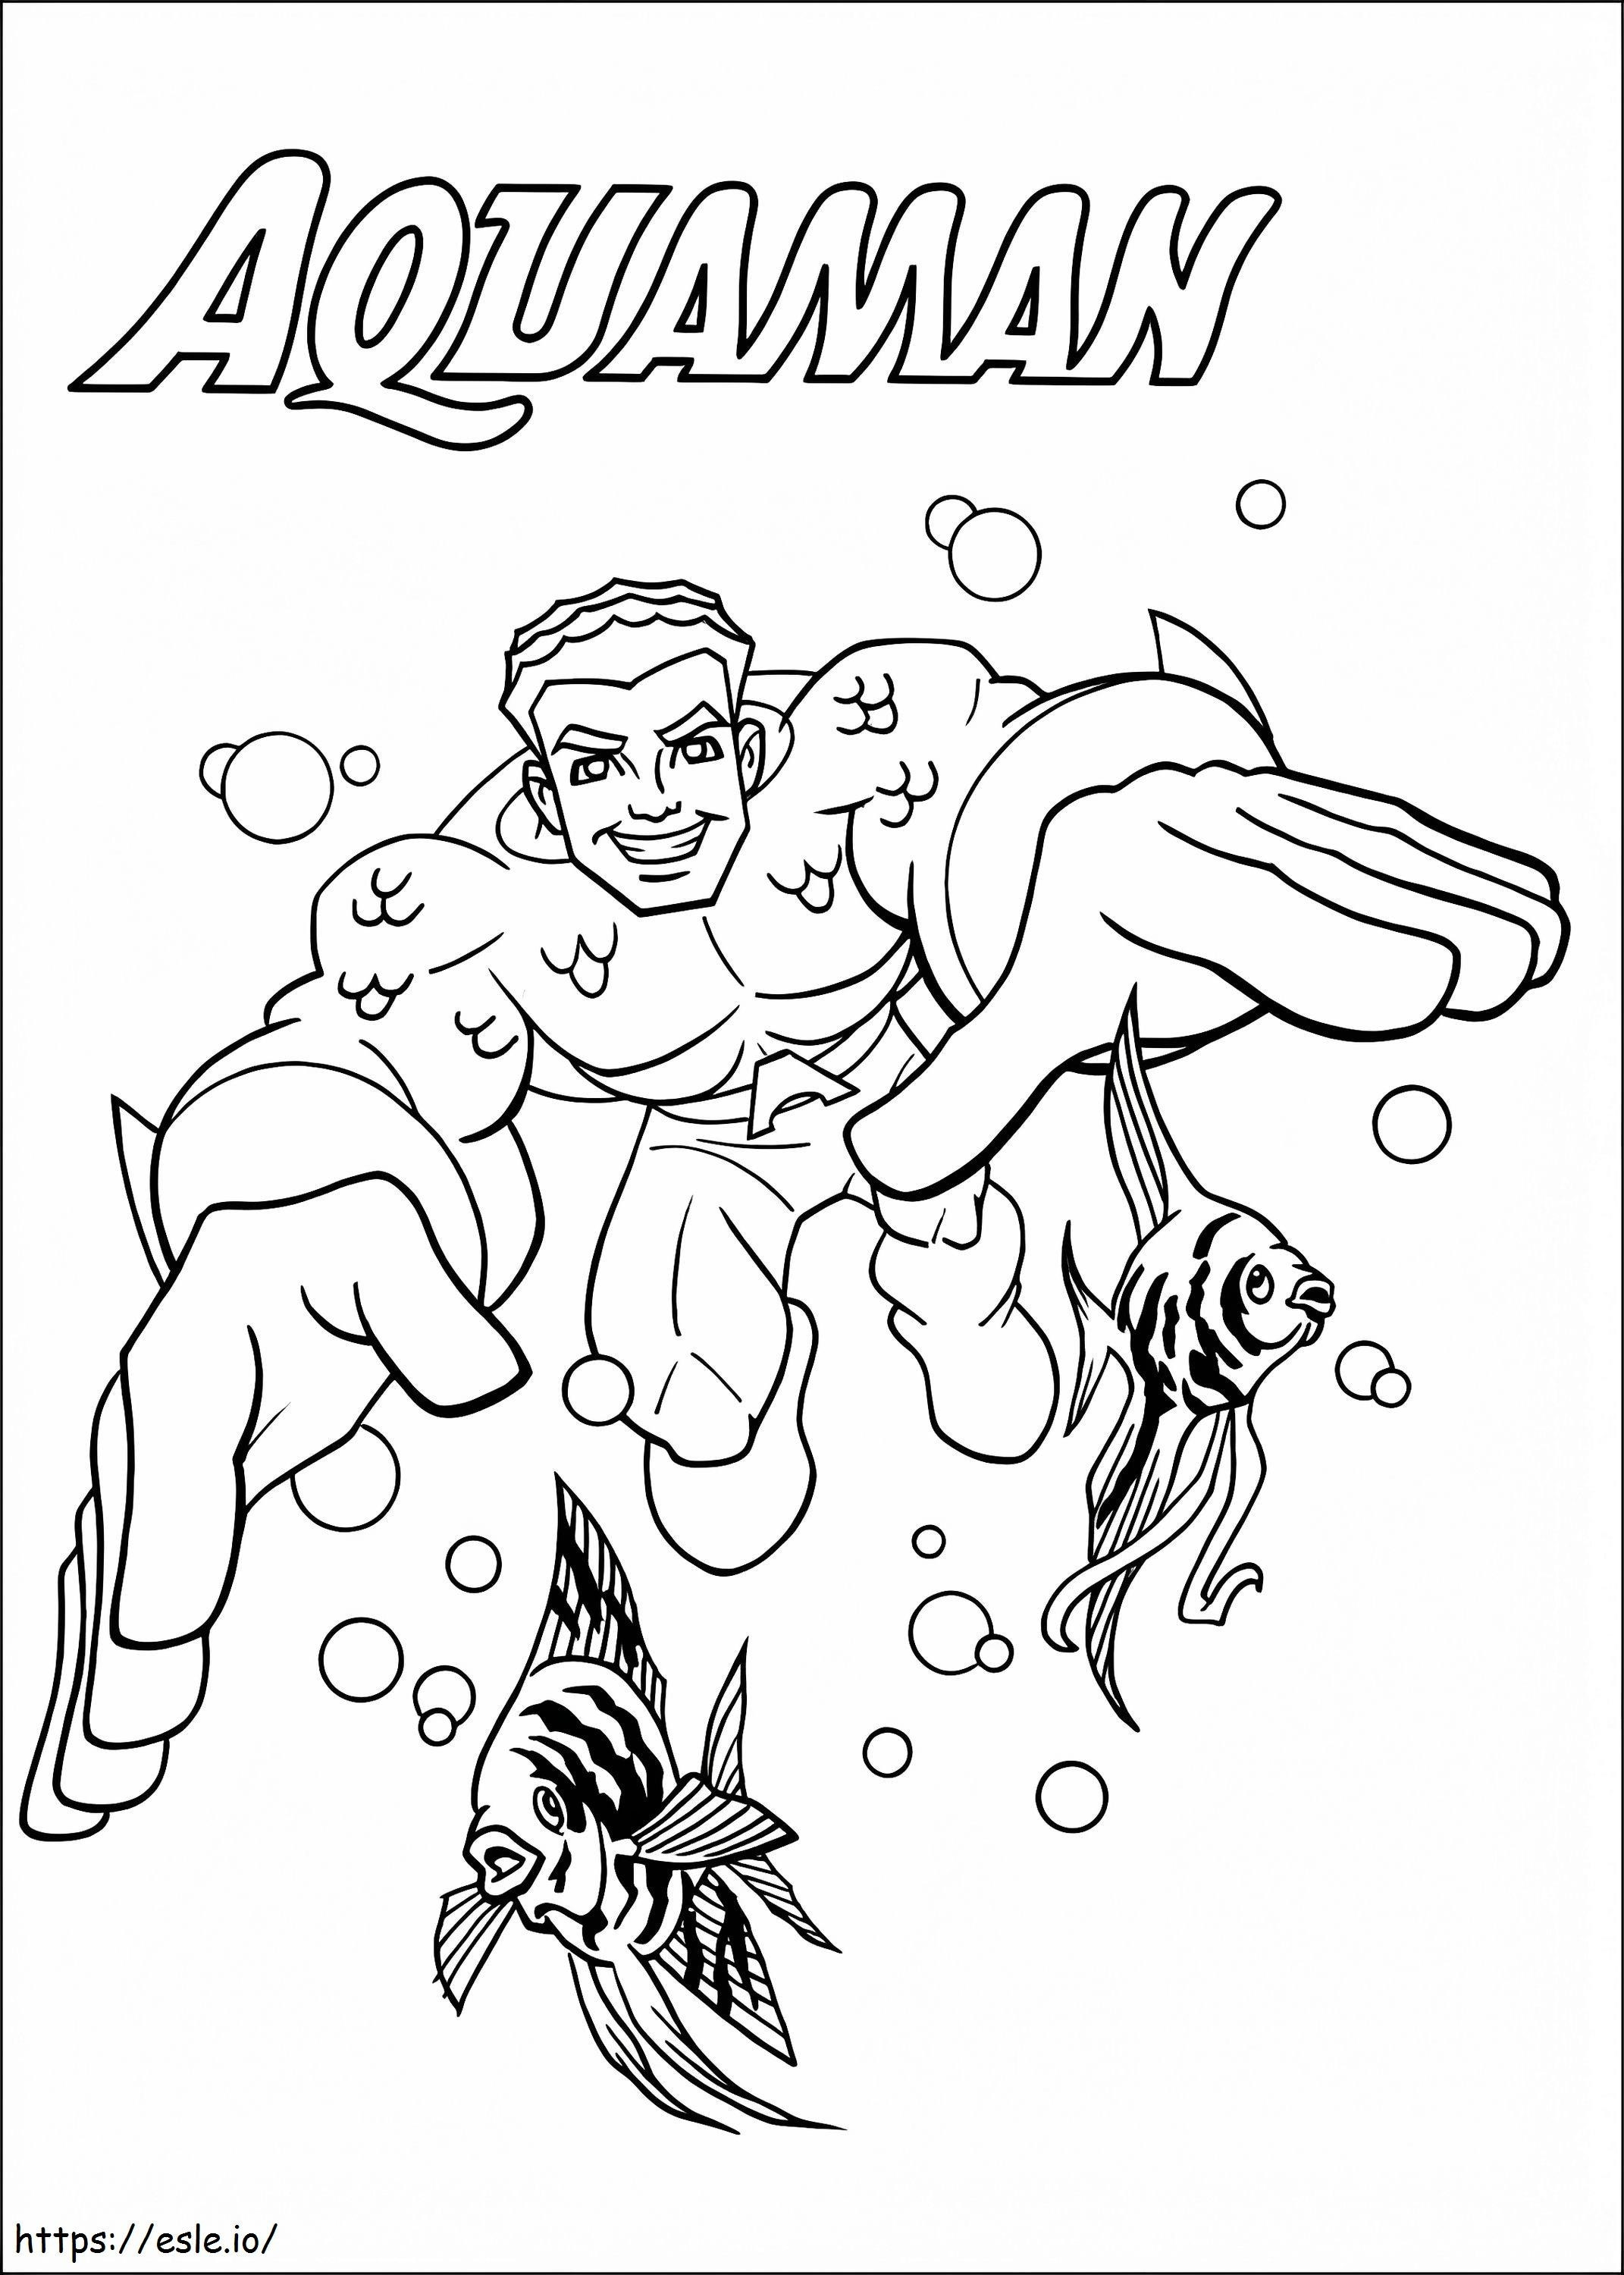 Aquaman From Super Friends coloring page